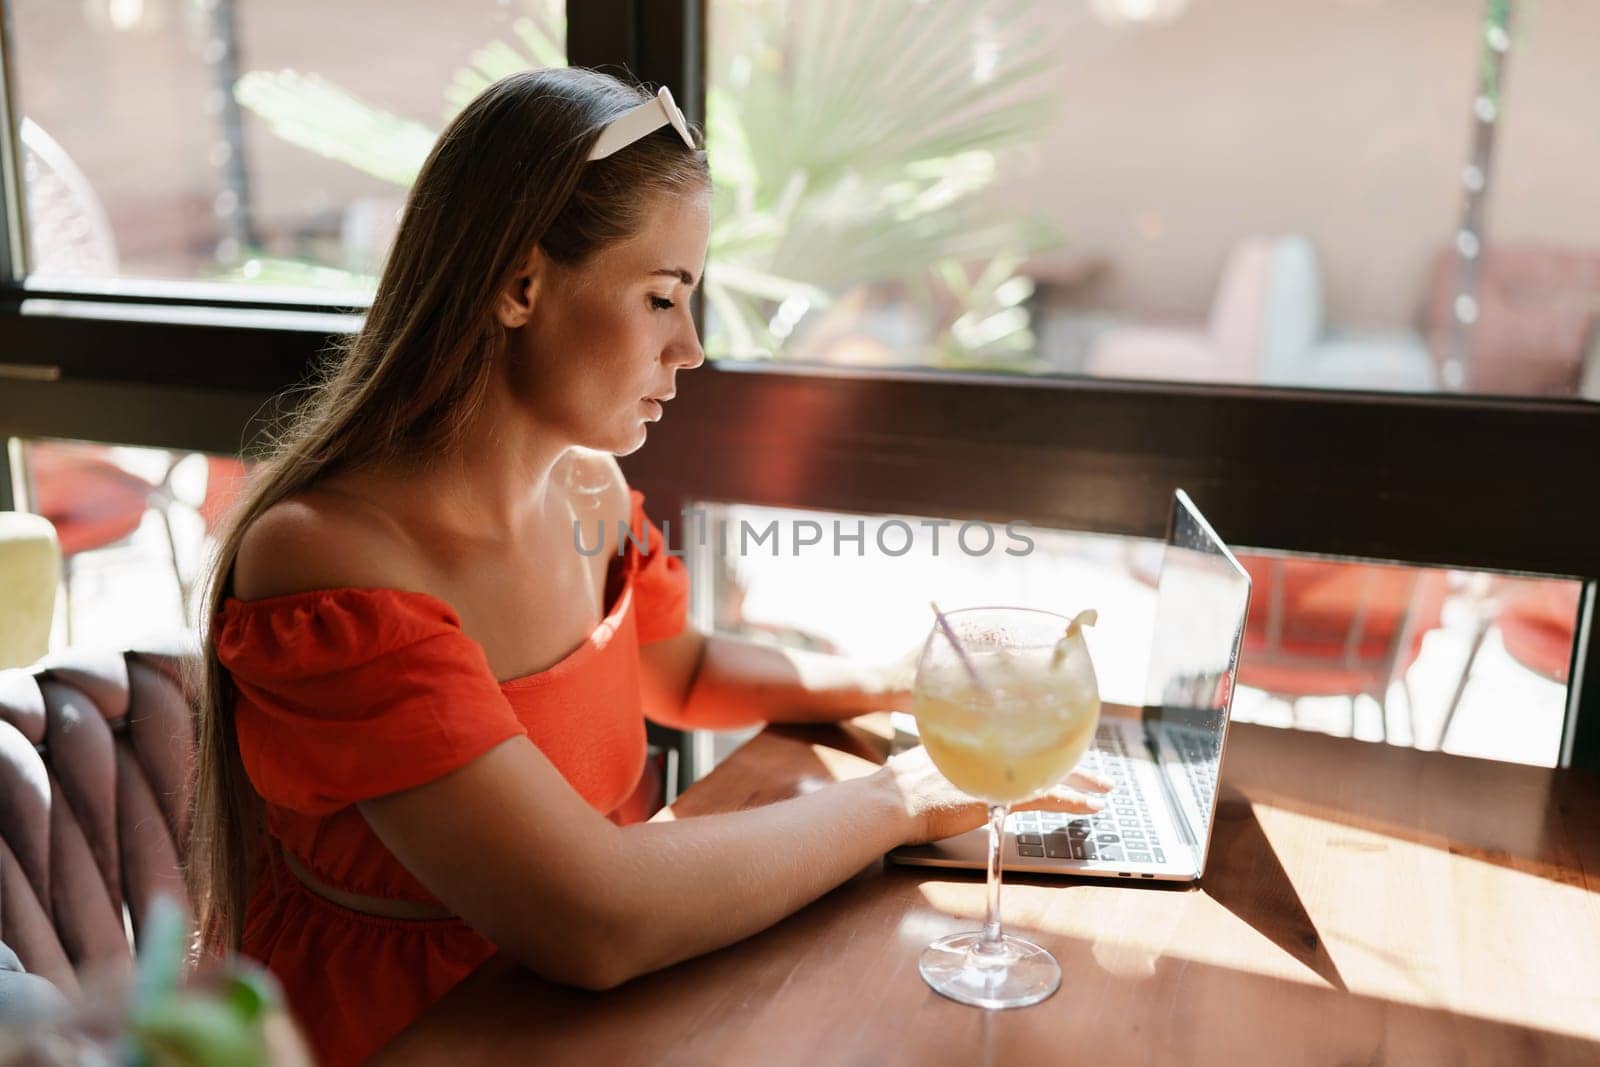 Woman works on laptop in a sunny cafe, glass of juice nearby. The setting is modern, with natural light illuminating the space. The image captures a moment of focused work